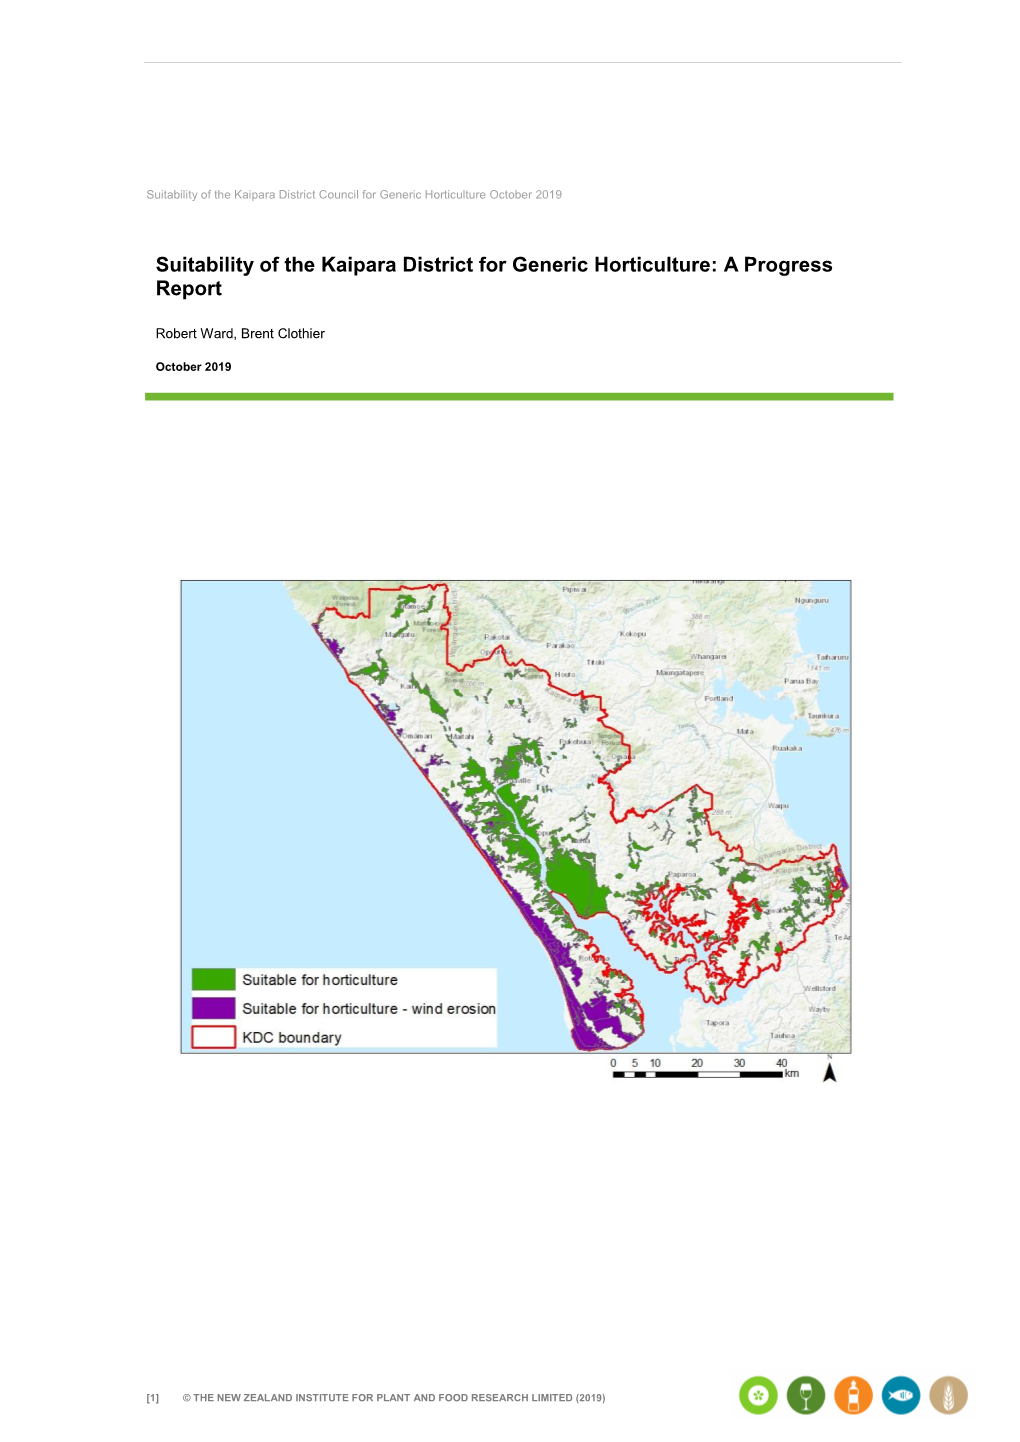 Suitability of the Kaipara District Council for Generic Horticulture October 2019